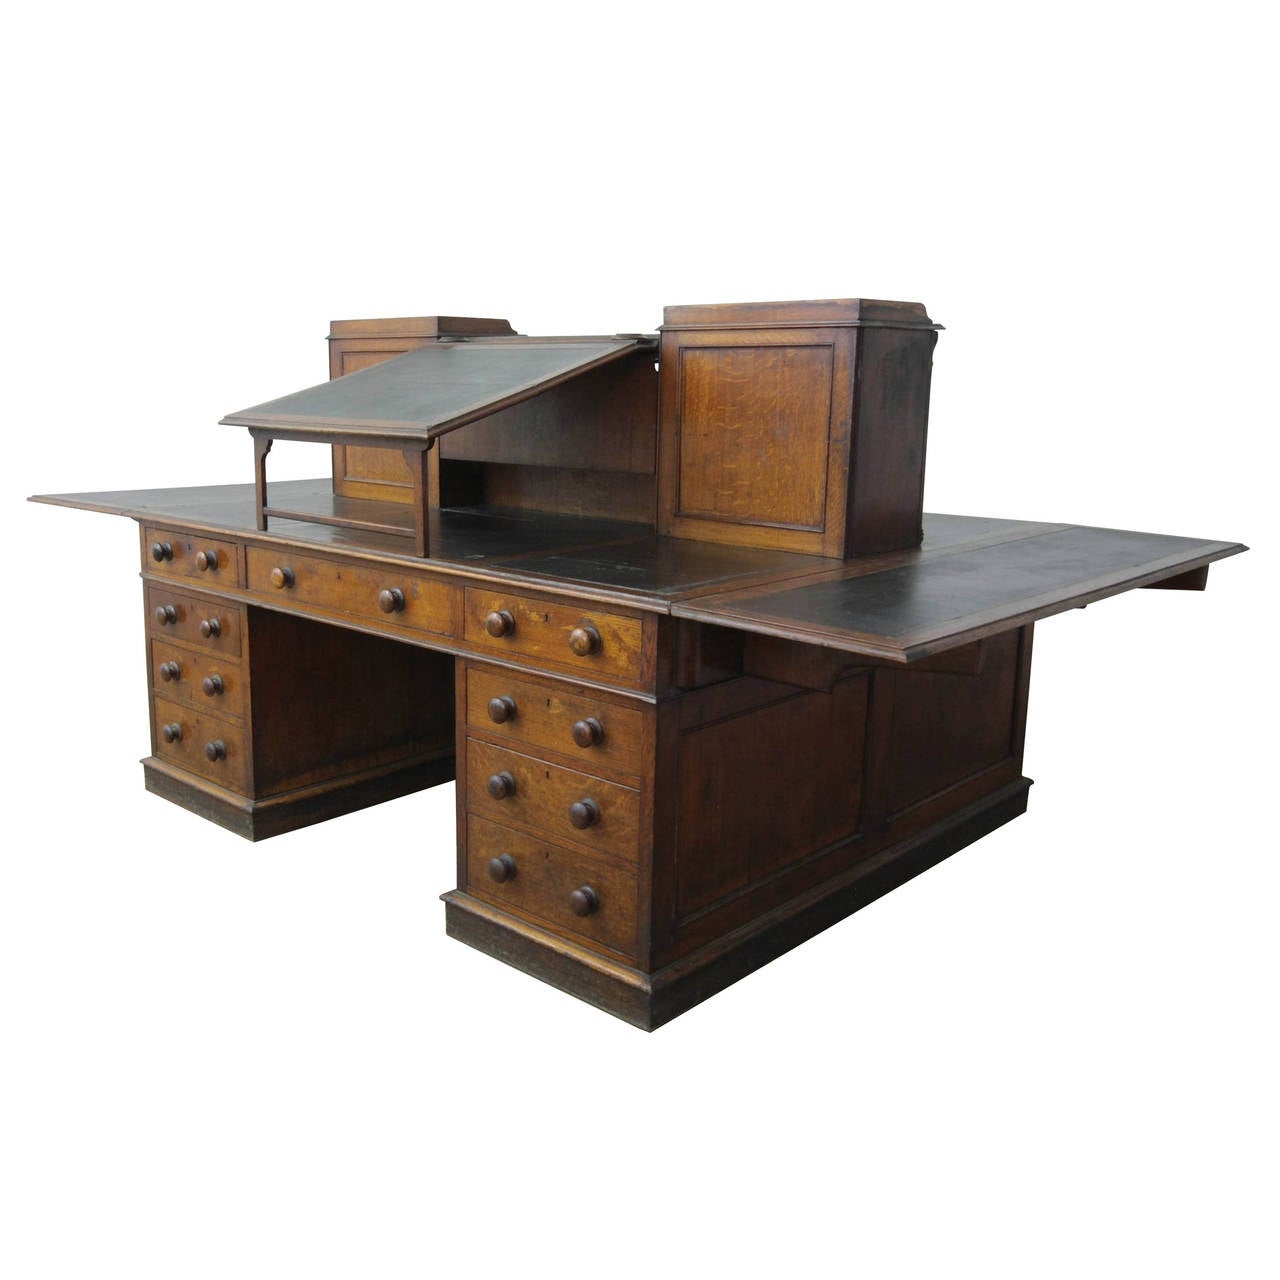 British Oak Dickens Desk, Attributed to Gillows